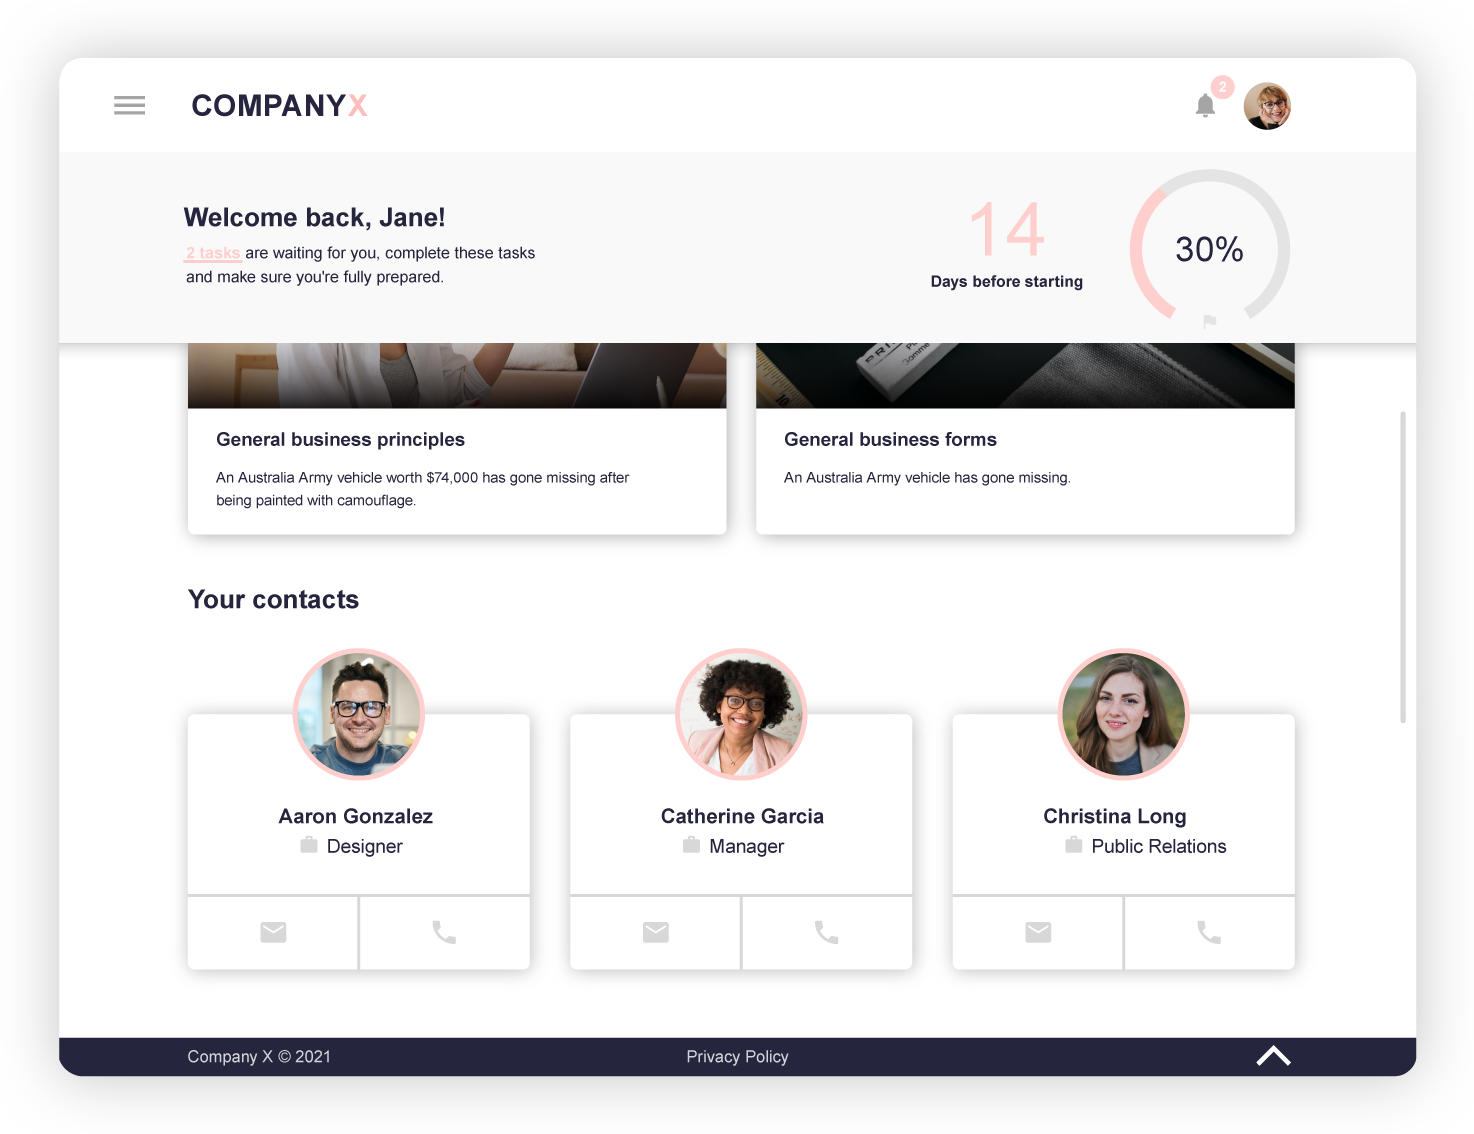 Use the platform to help your new hires build connections with their future teammates through pre-start introductions. This will help them ask their new colleagues and key contacts any questions as soon as they arise.